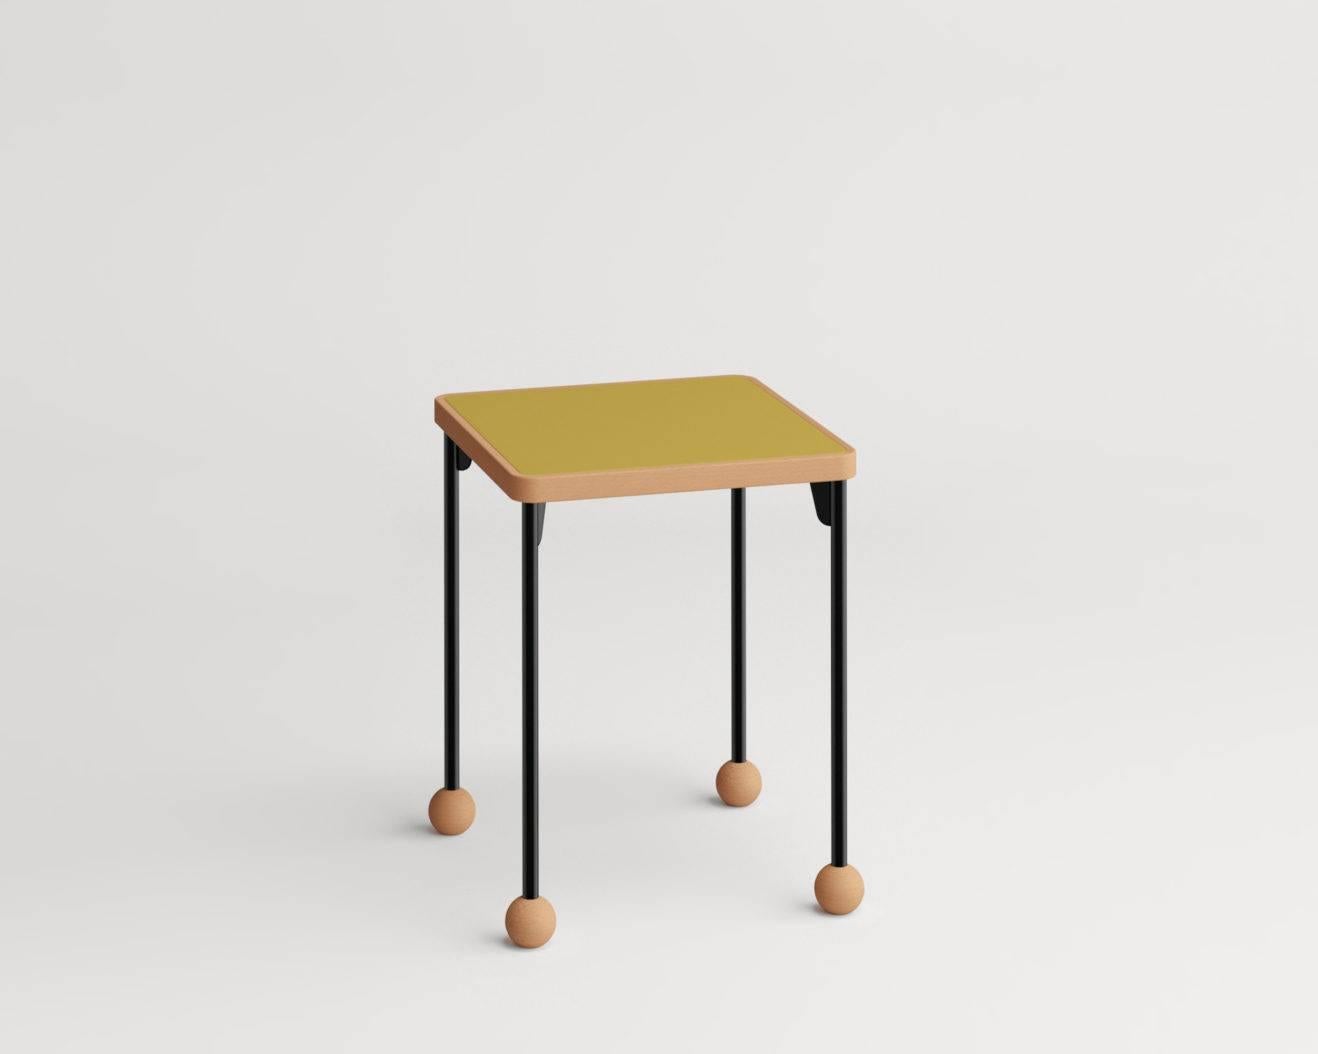 Stools or side tables by Russian designer Dmitry Samygin

Beech wood, metal and linoleum Forbo
Measures: 45.7 cm x 35.6 cm x 35.6 cm

Available colors: black, grey, red, yellow and green

[Sold individually]

After studying Applied Arts at the